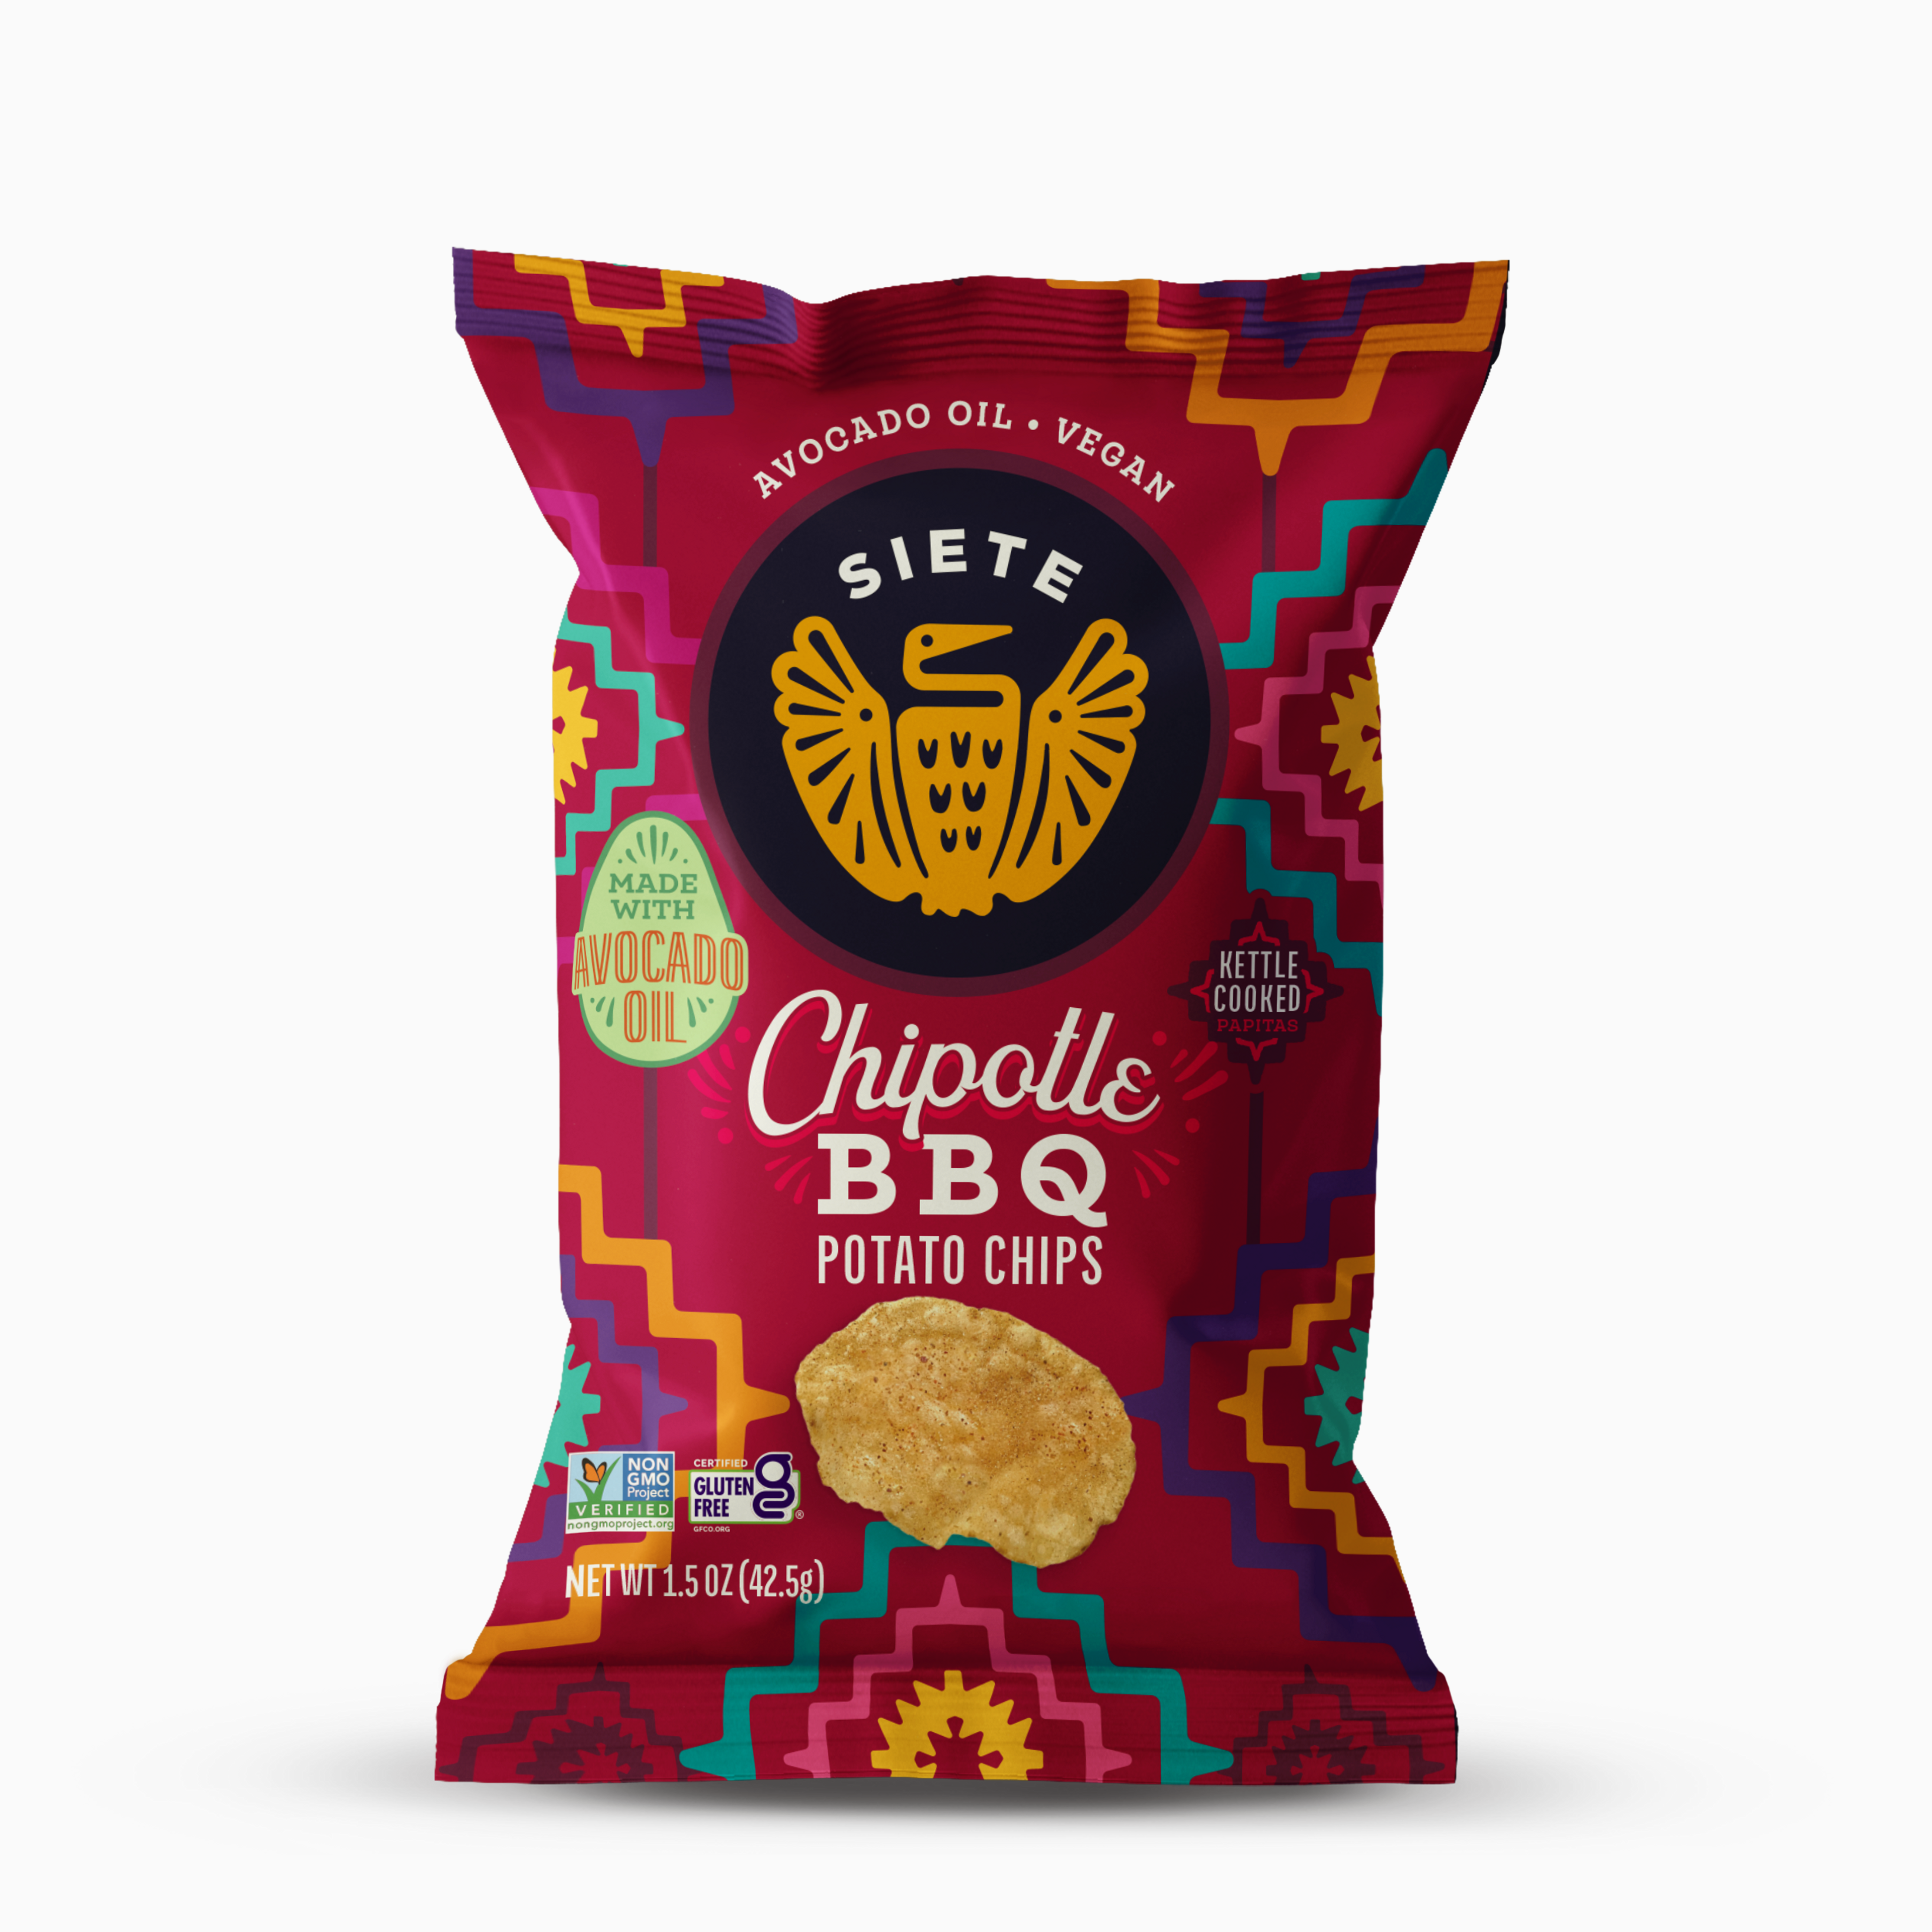 Chipotle BBQ Kettle Cooked Potato Chips 1.5 oz - 24 bags